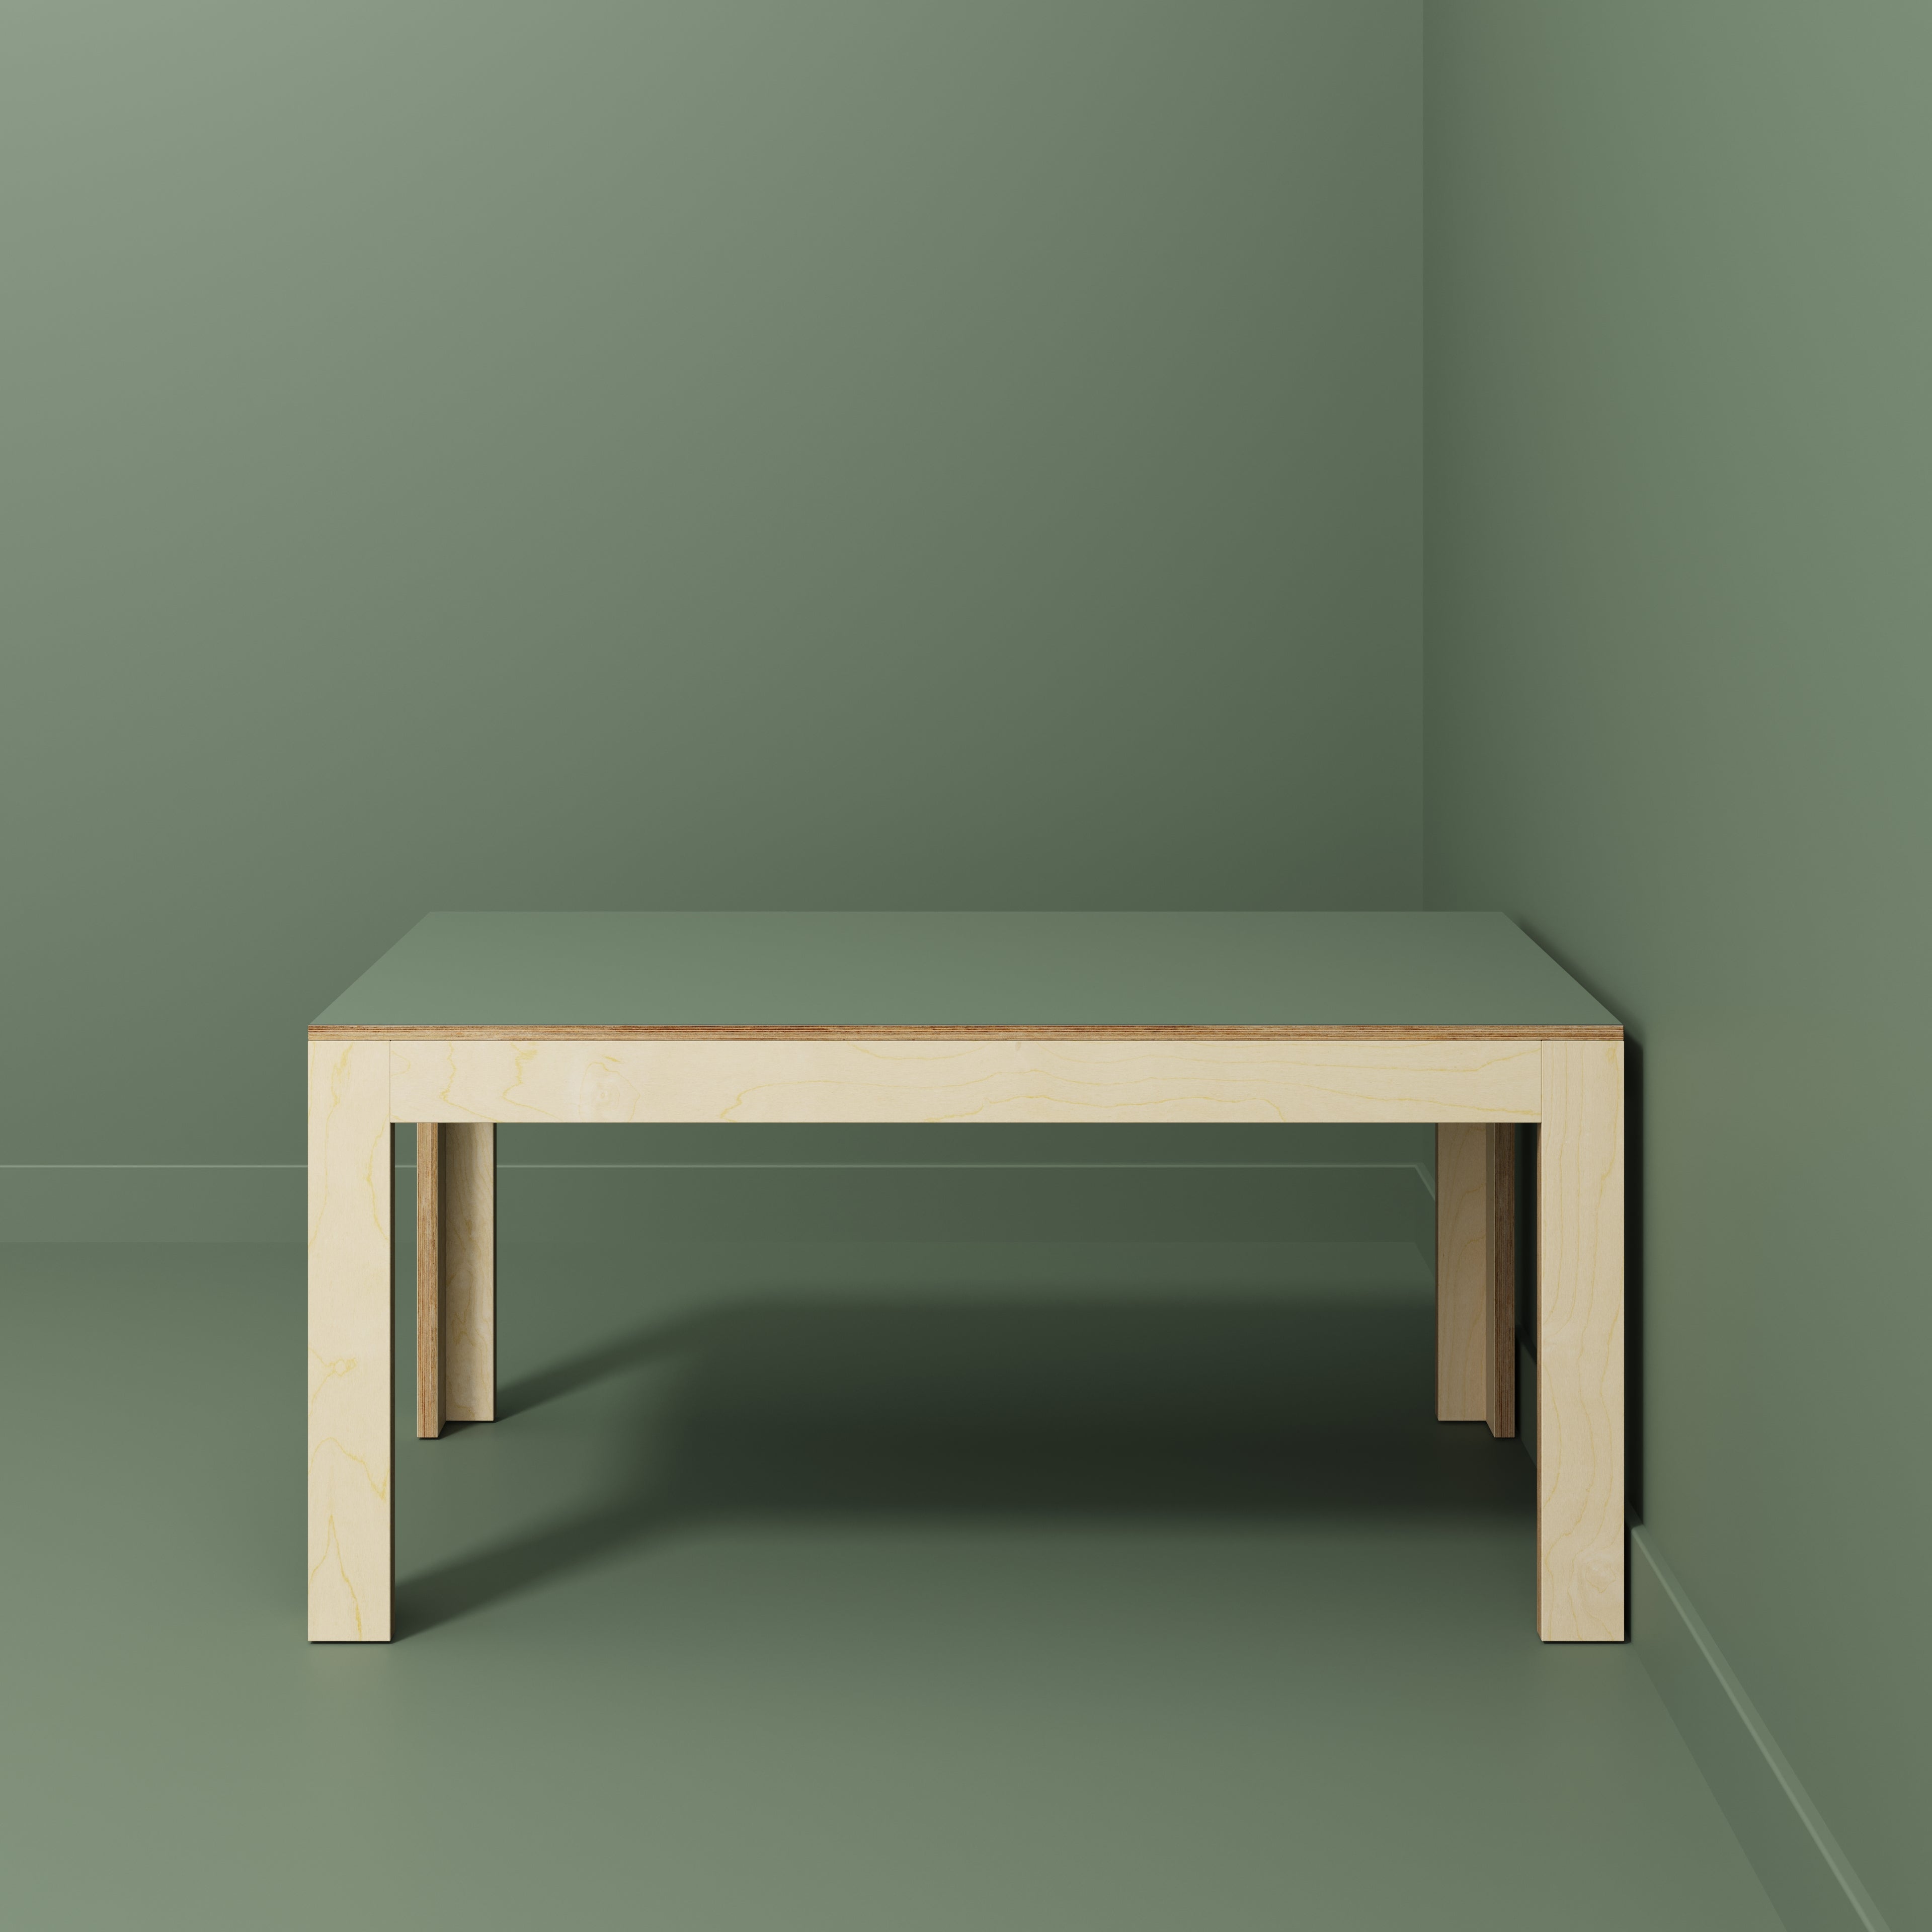 Table with Solid Frame - Formica Green Slate - 1600(w) x 800(d) x 750(h)